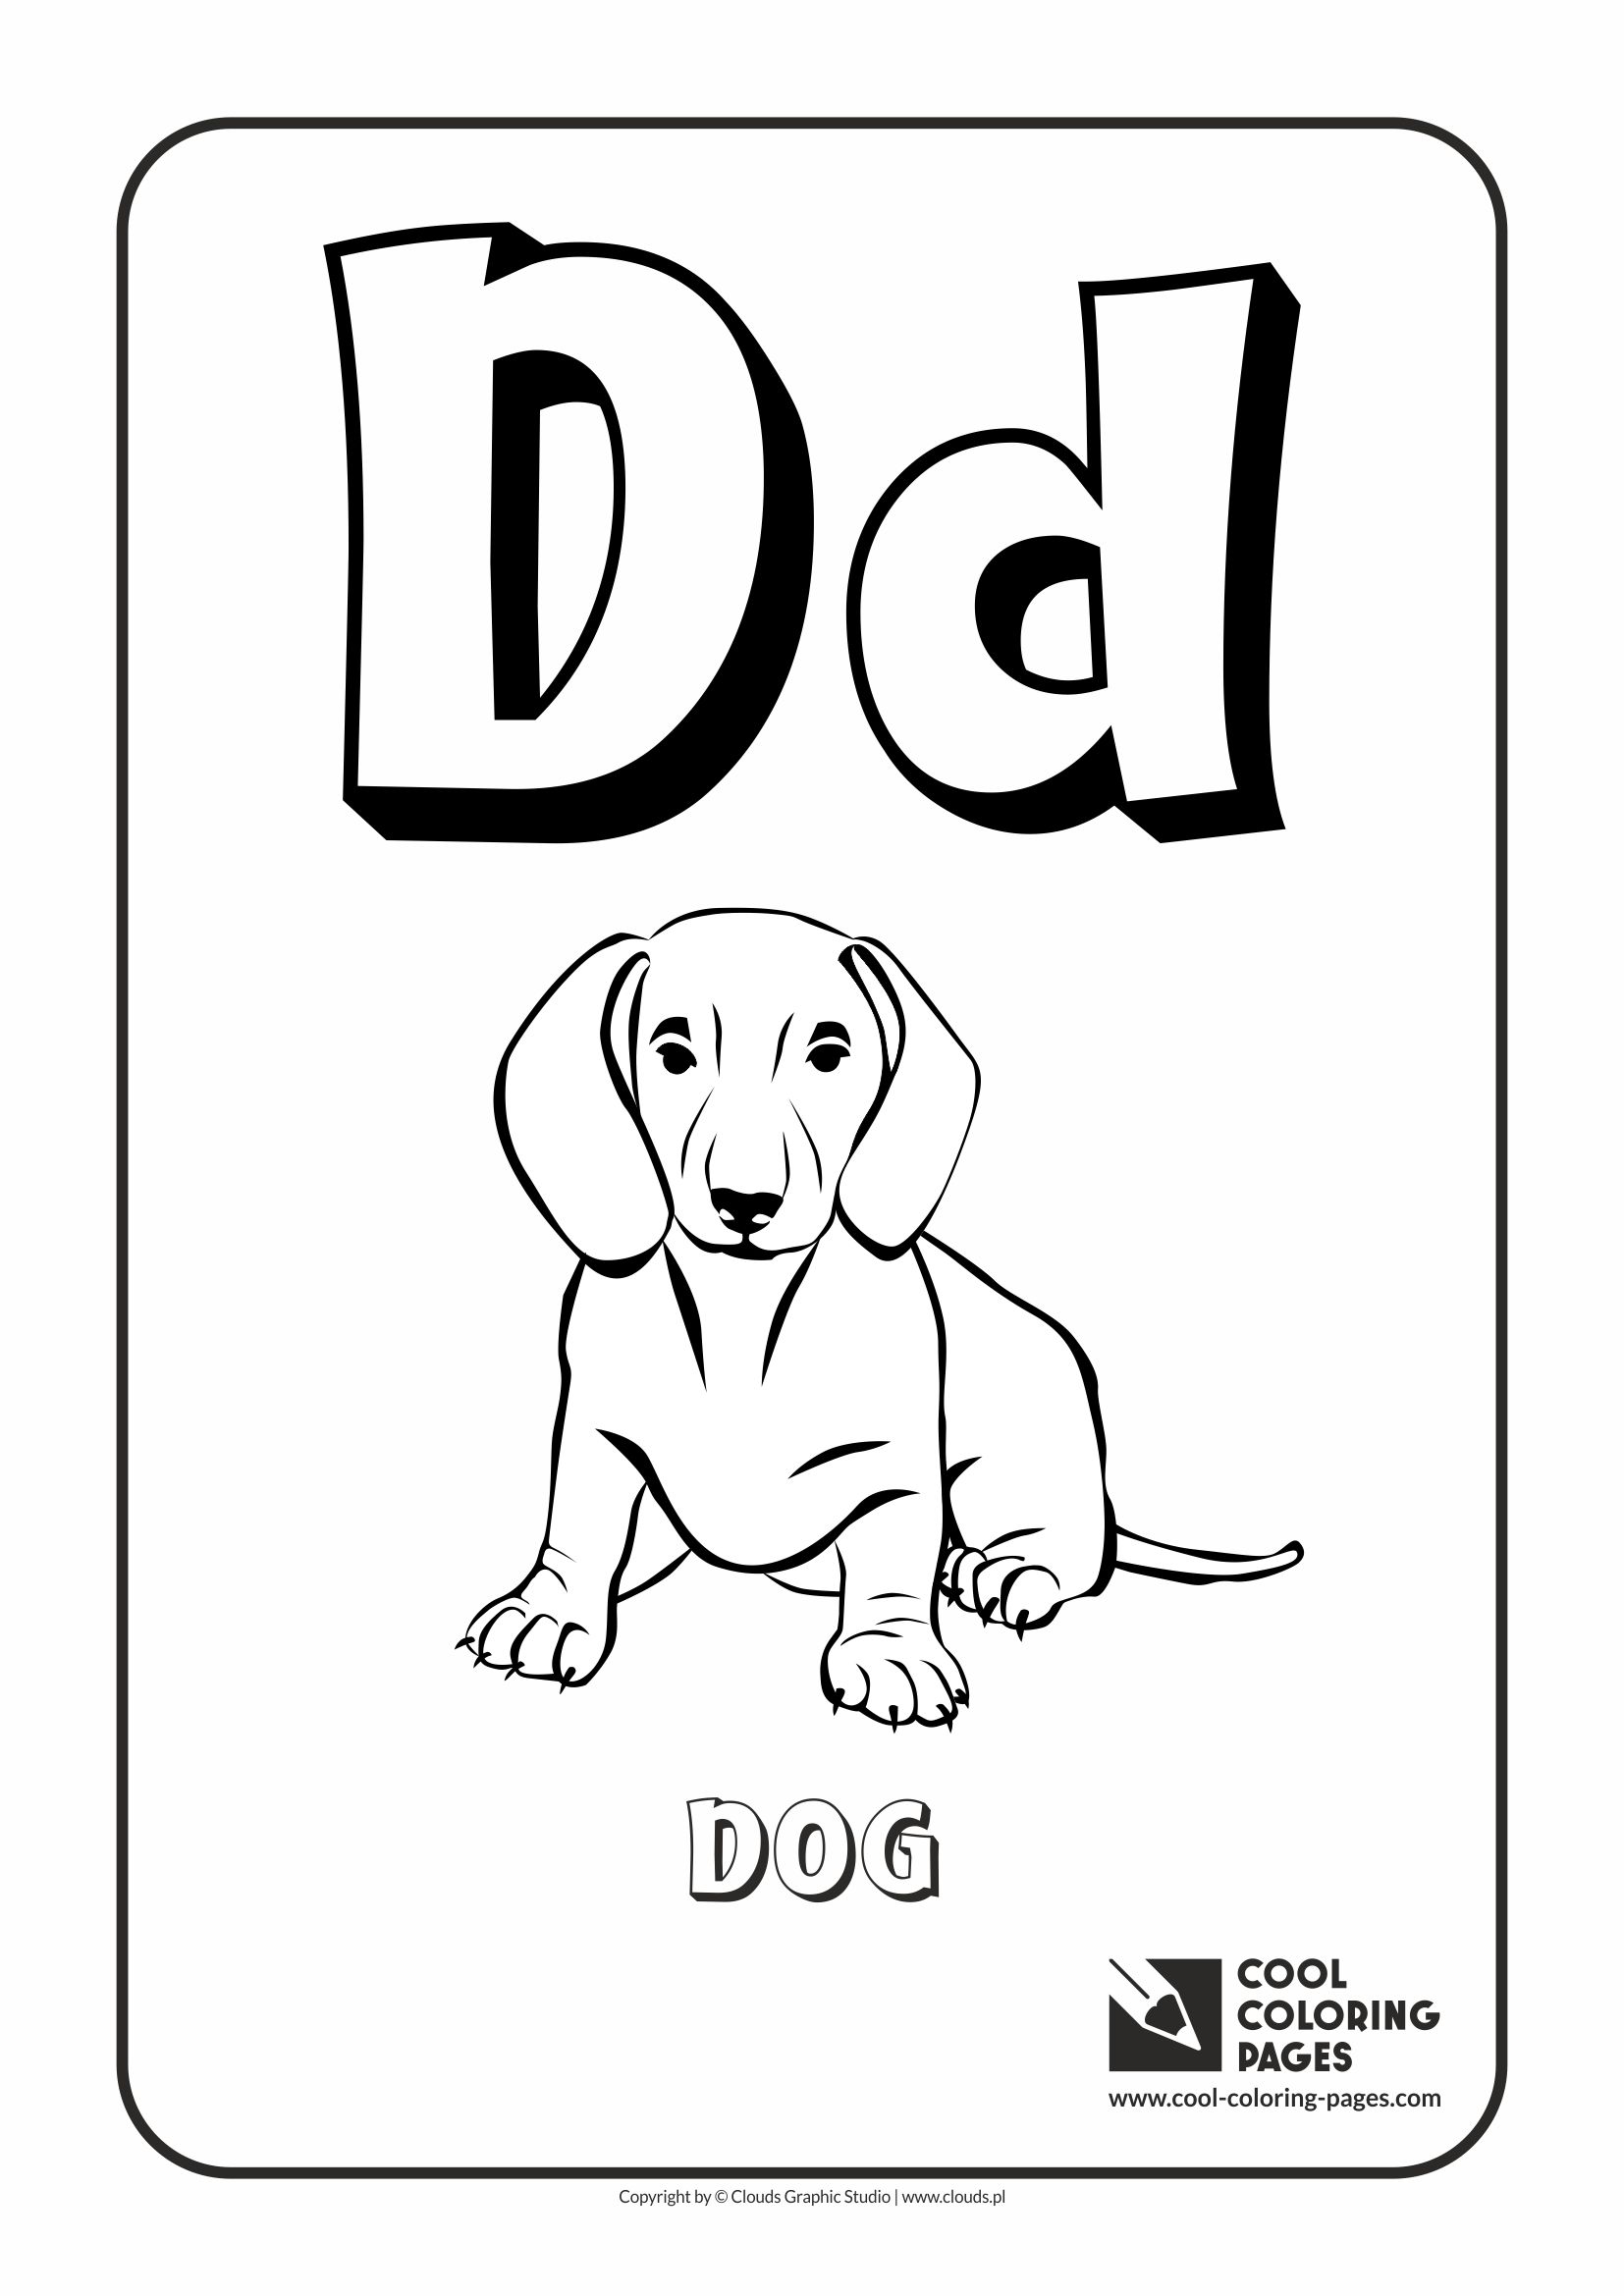 Cool coloring pages letter d